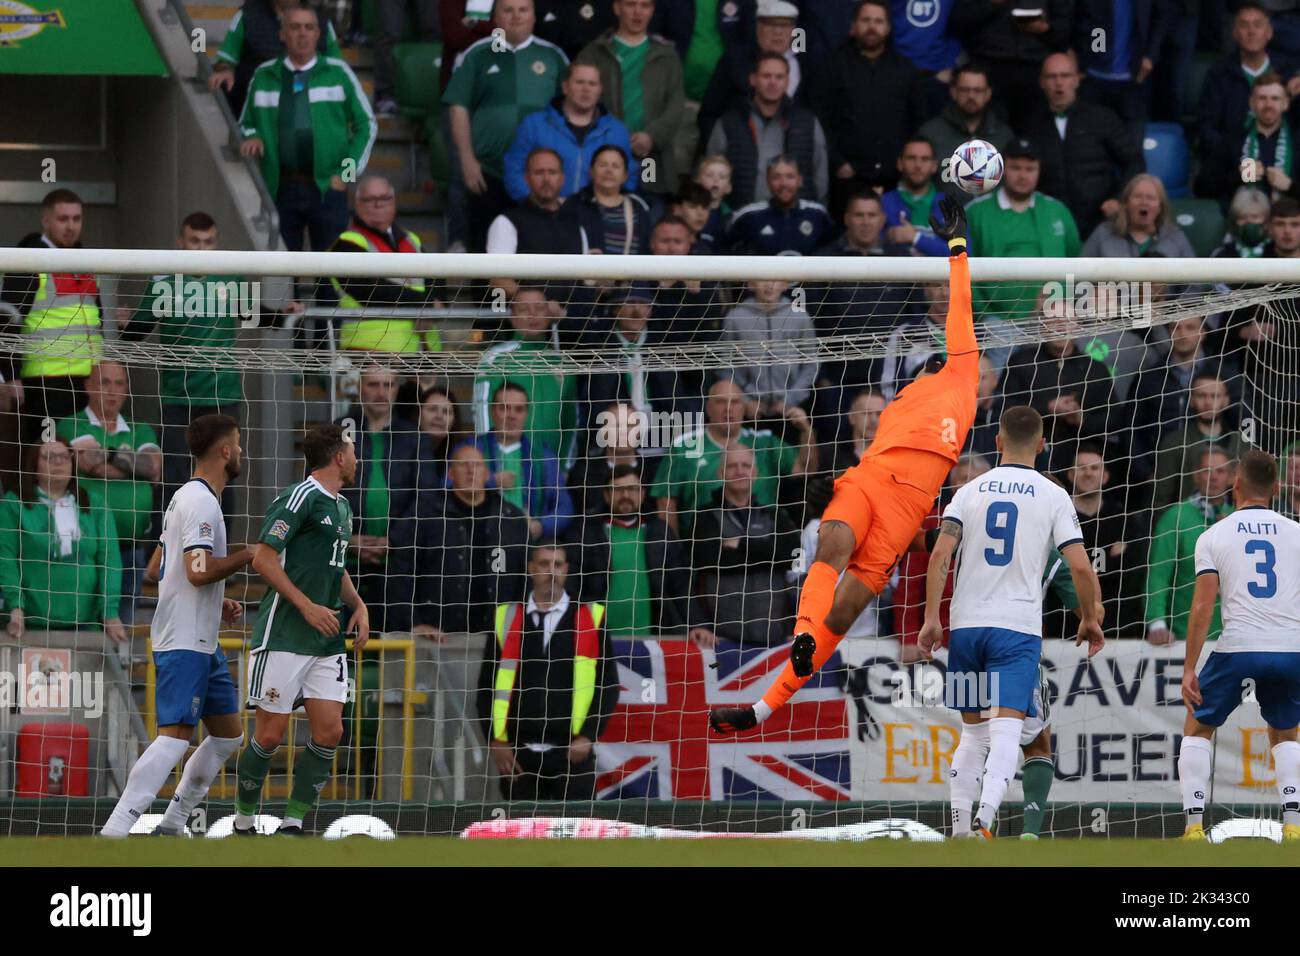 Kosovo goalkeeper Arijanet Muric tips the ball over after a header from Northern Ireland's Josh Magennis during the UEFA Nations League Group J Match at Windsor Park, Belfast. Picture date: Saturday September 24, 2022. Stock Photo